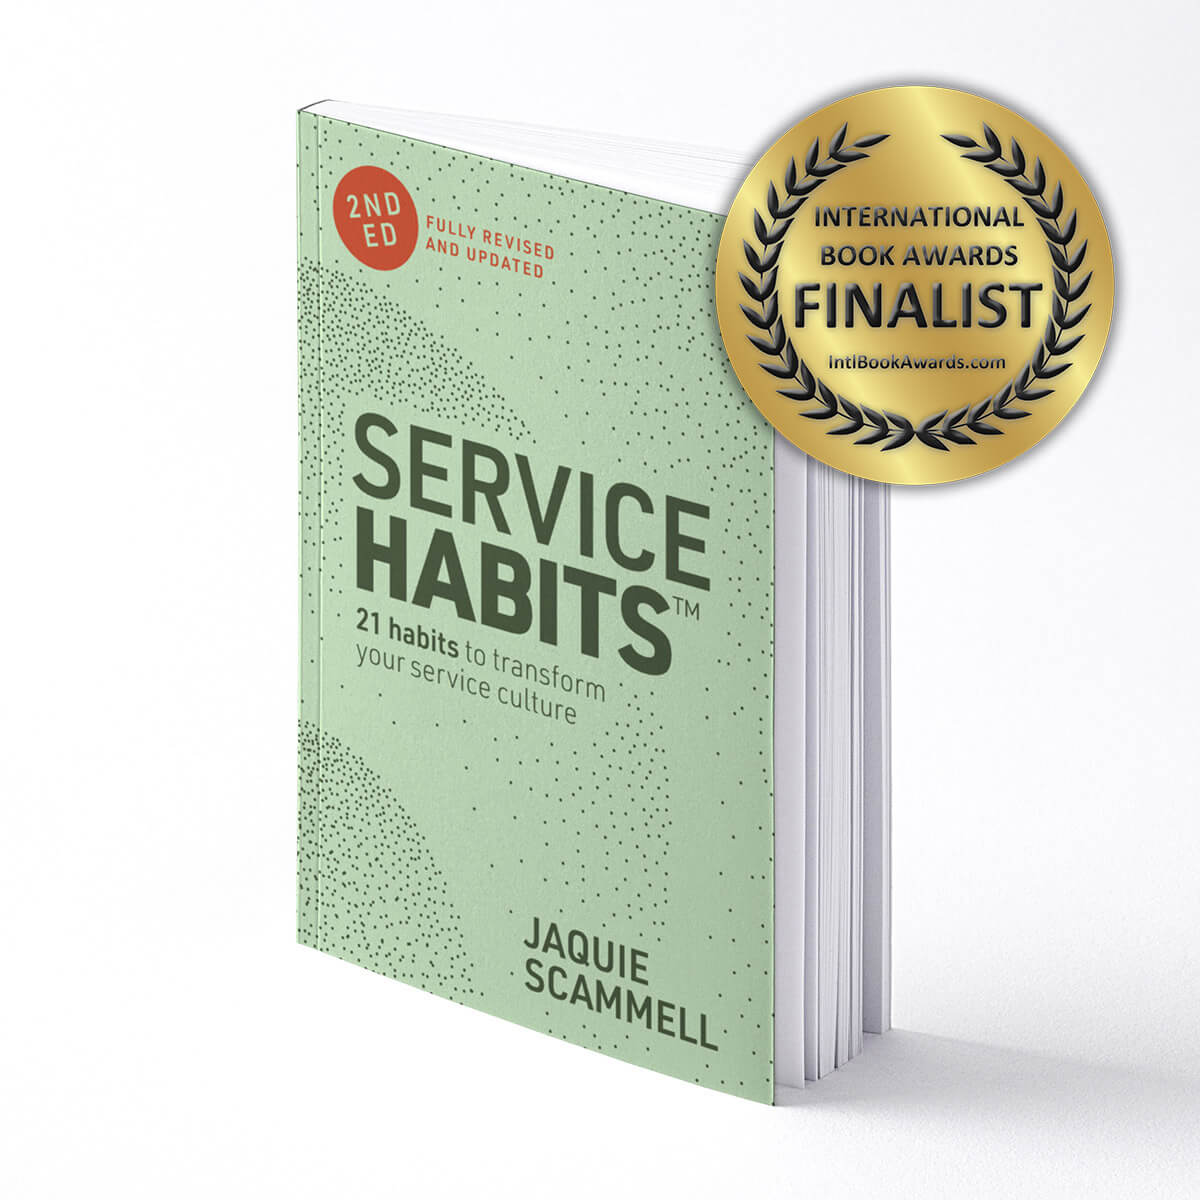 Service Habits 2nd Edition Book with a golden badge for the being a finalist in the International Book Awards